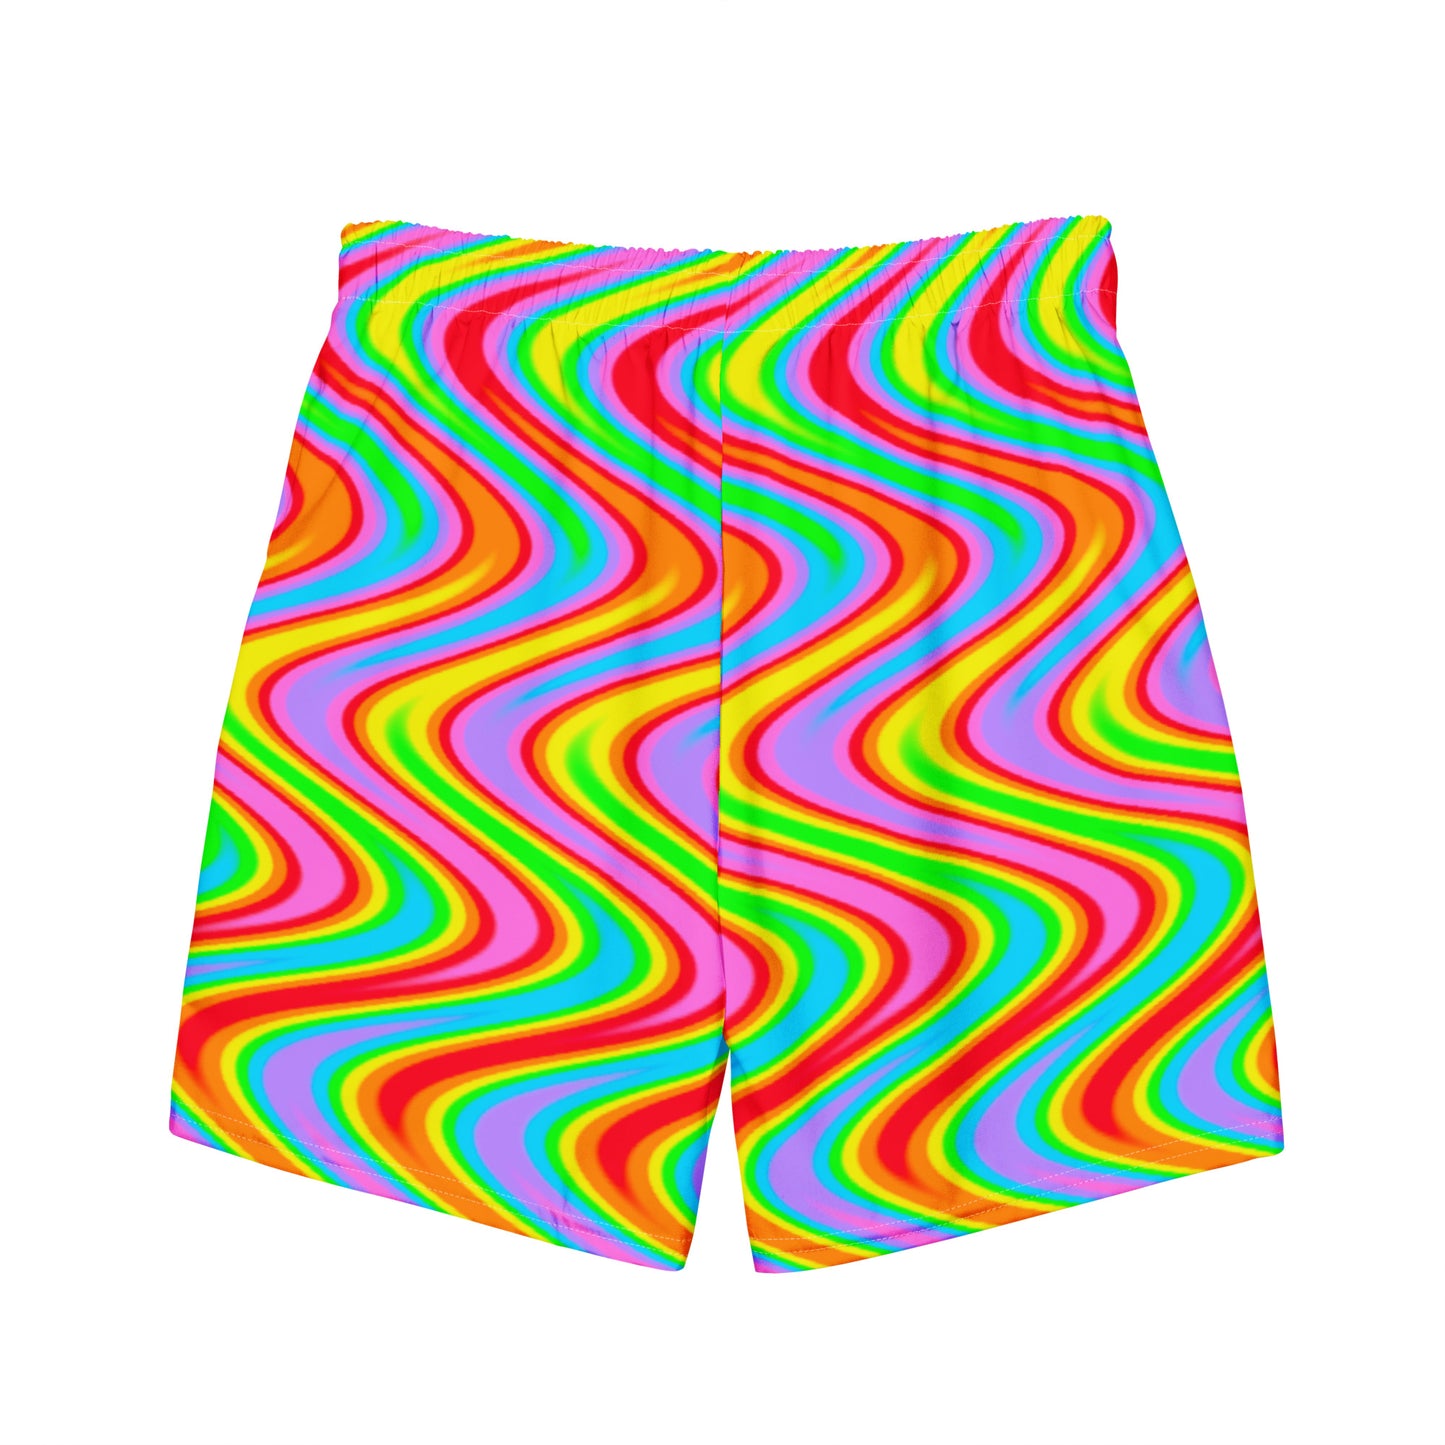 Psychedelic Wave Recycled Swim Shorts